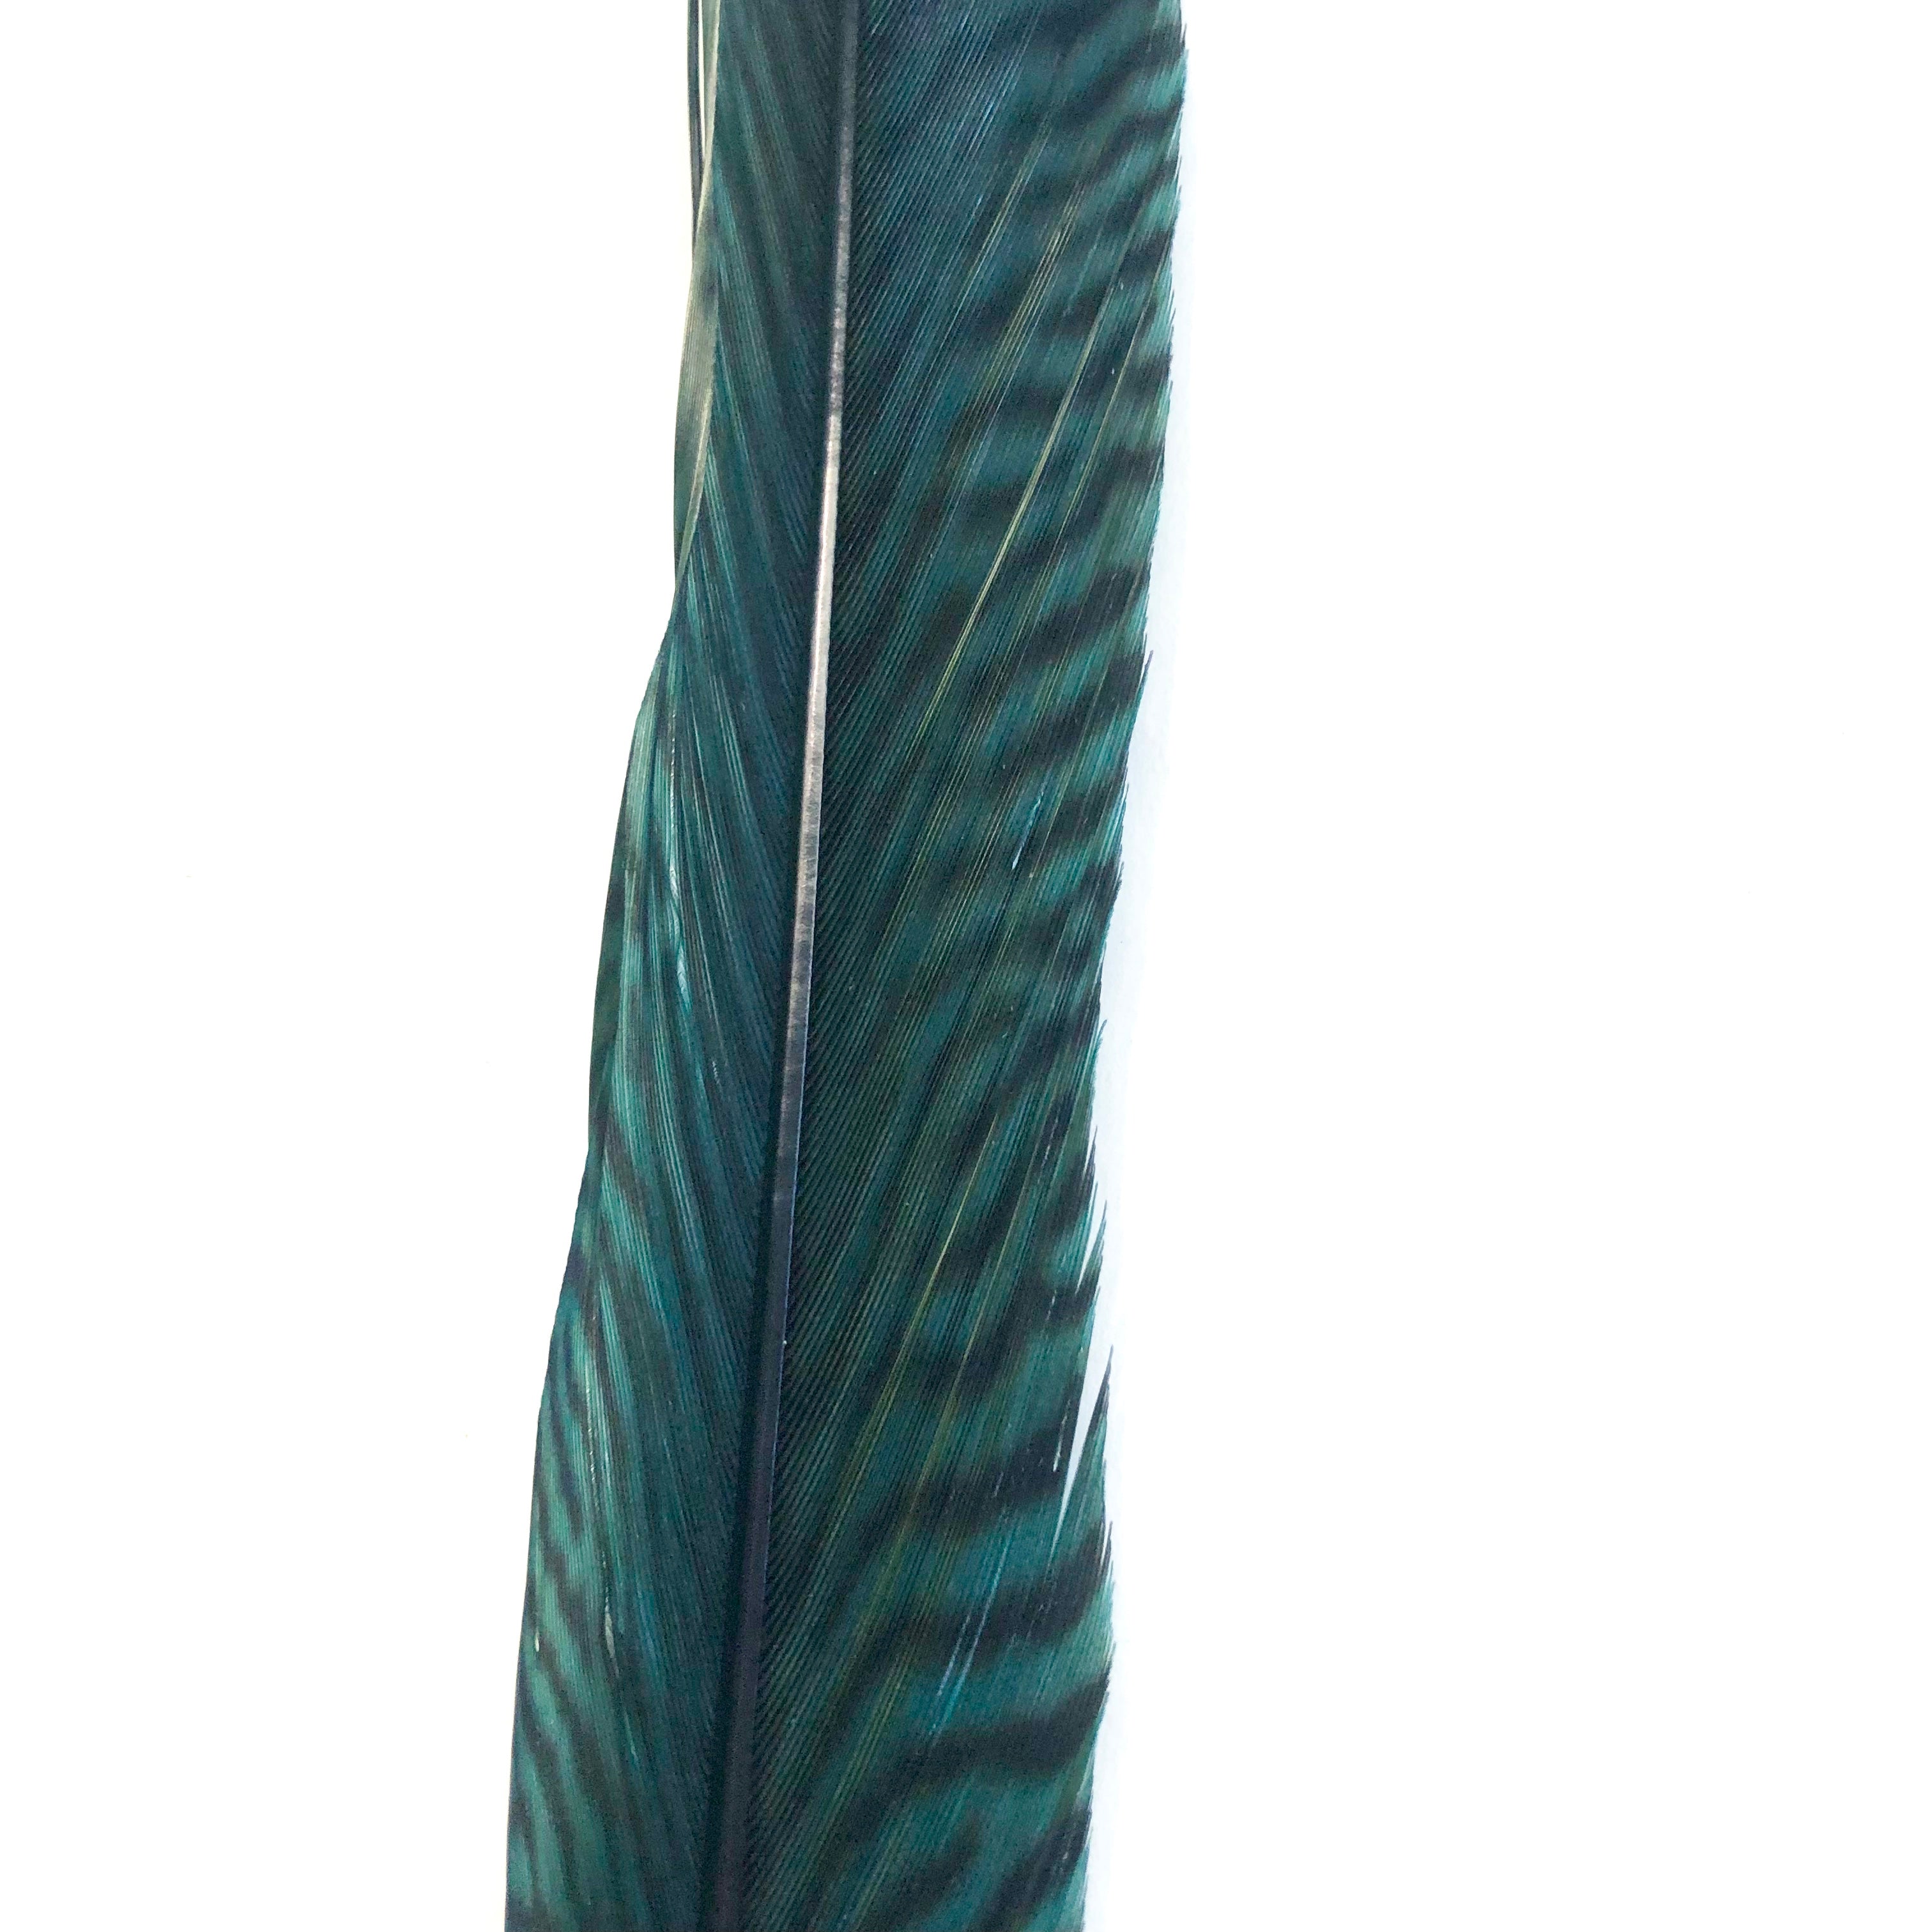 10" to 20" Golden Pheasant Side Tail Feather - Dark Teal ((SECONDS))